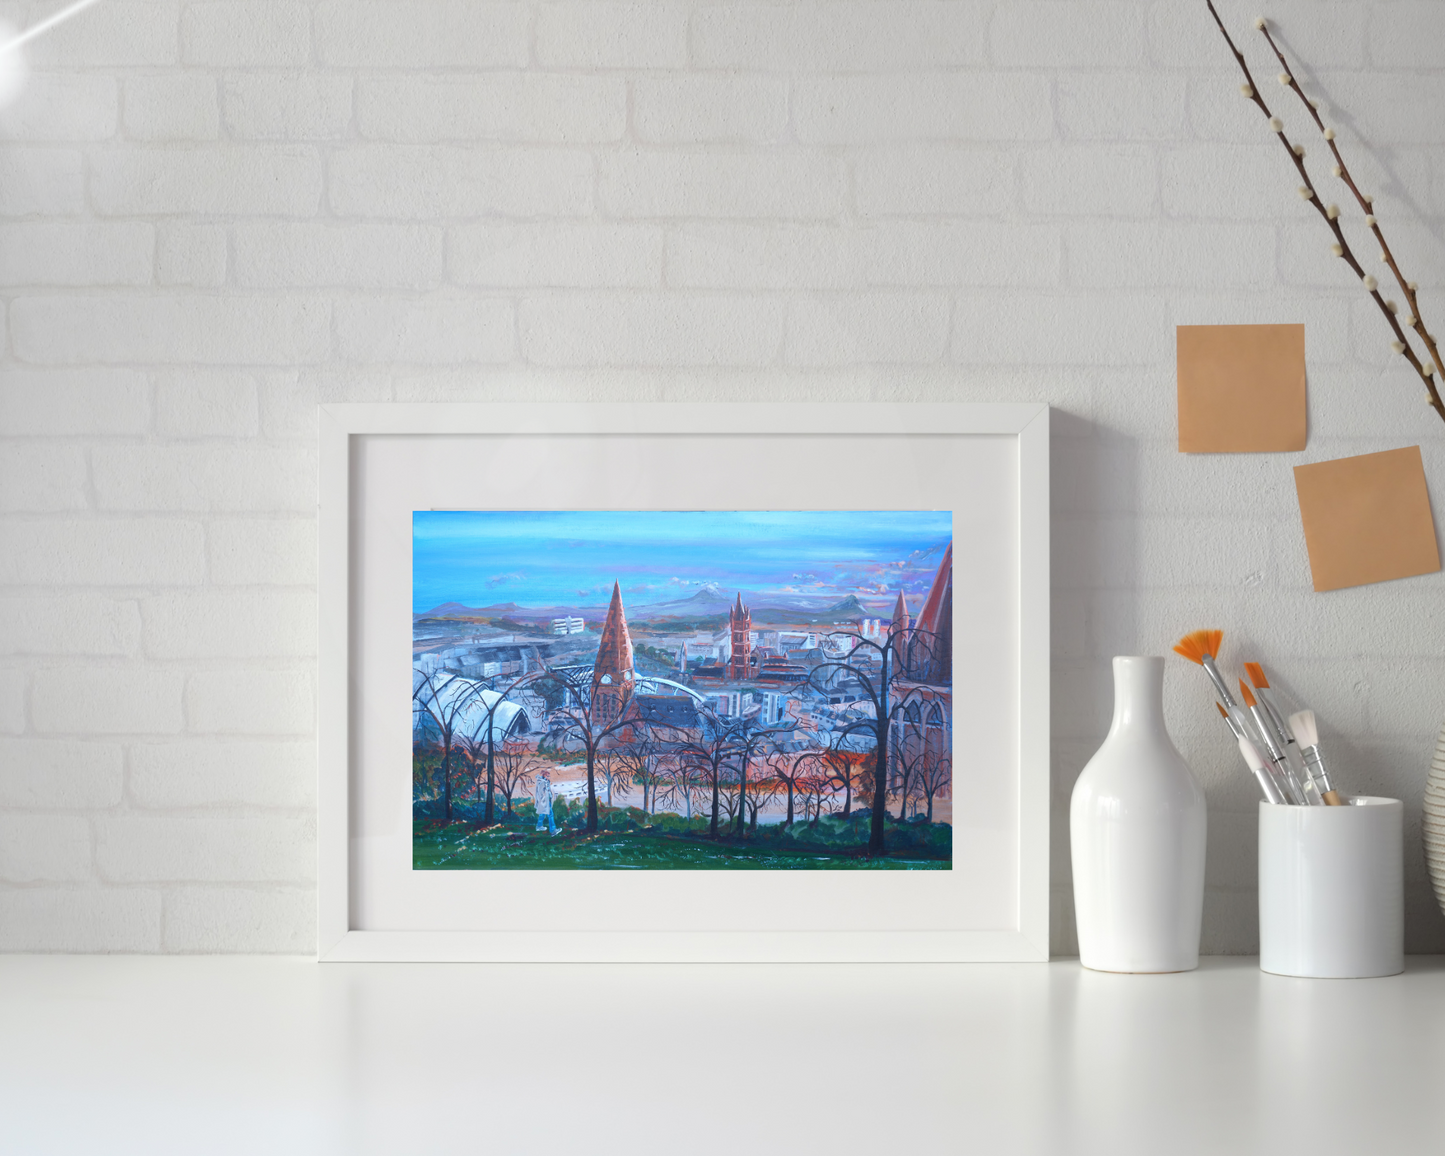 Glasgow wall art print small size in simple white frame on counter surface 